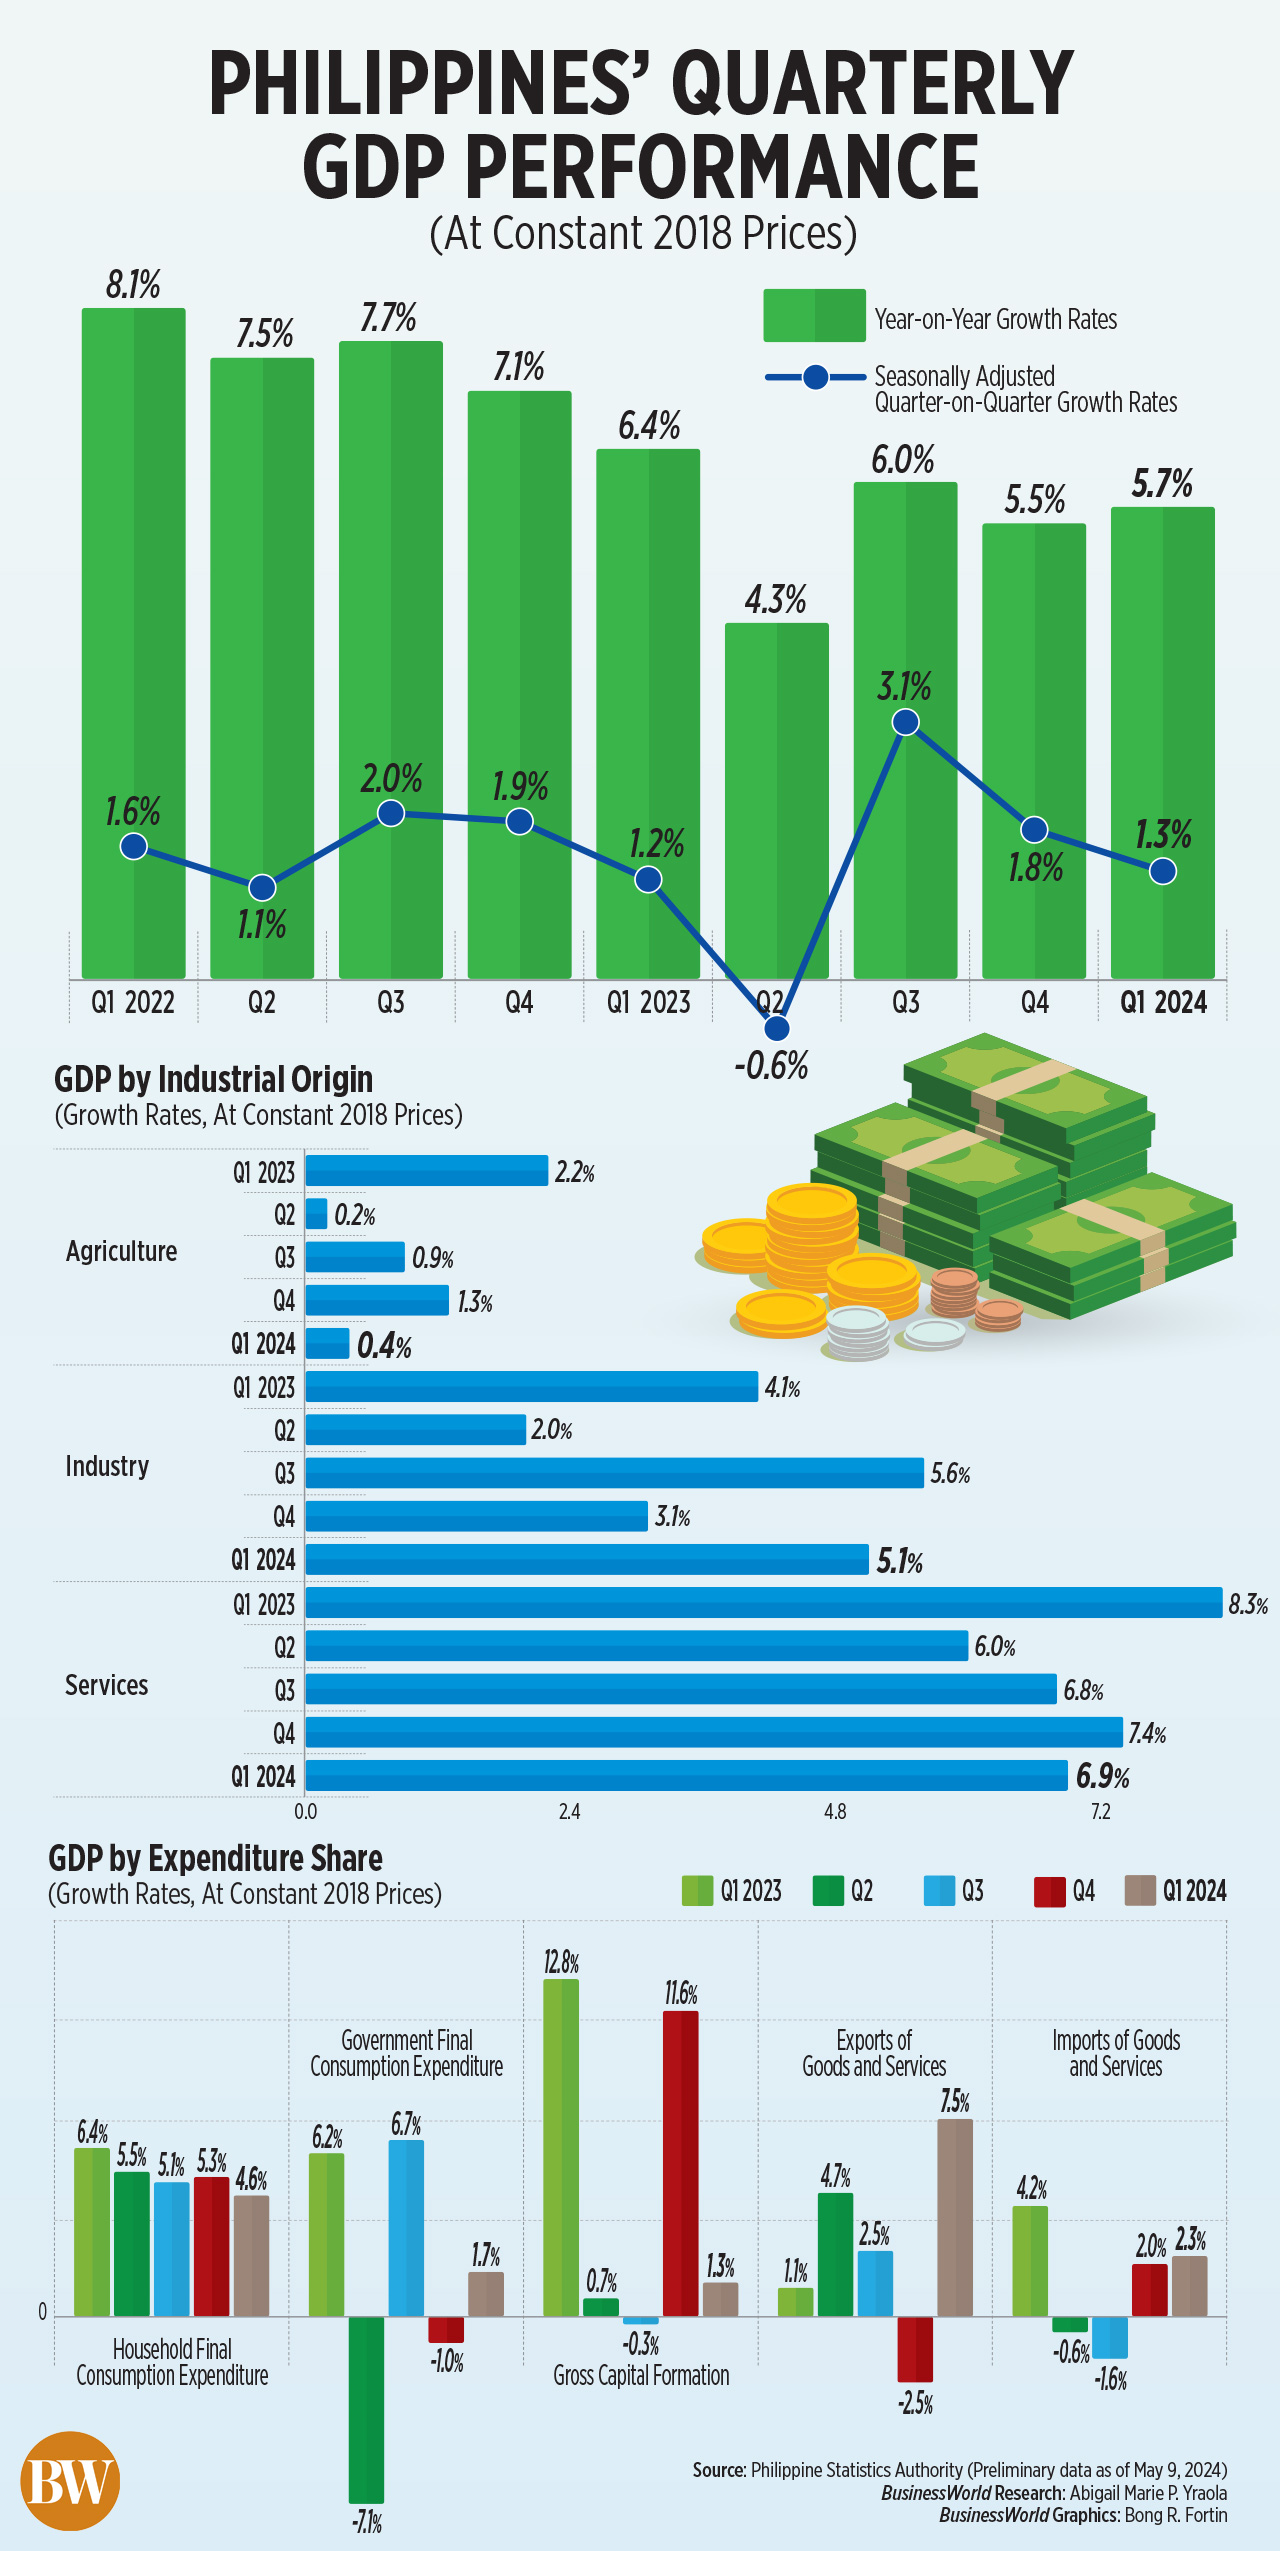 The Philippines' quarterly GDP performance